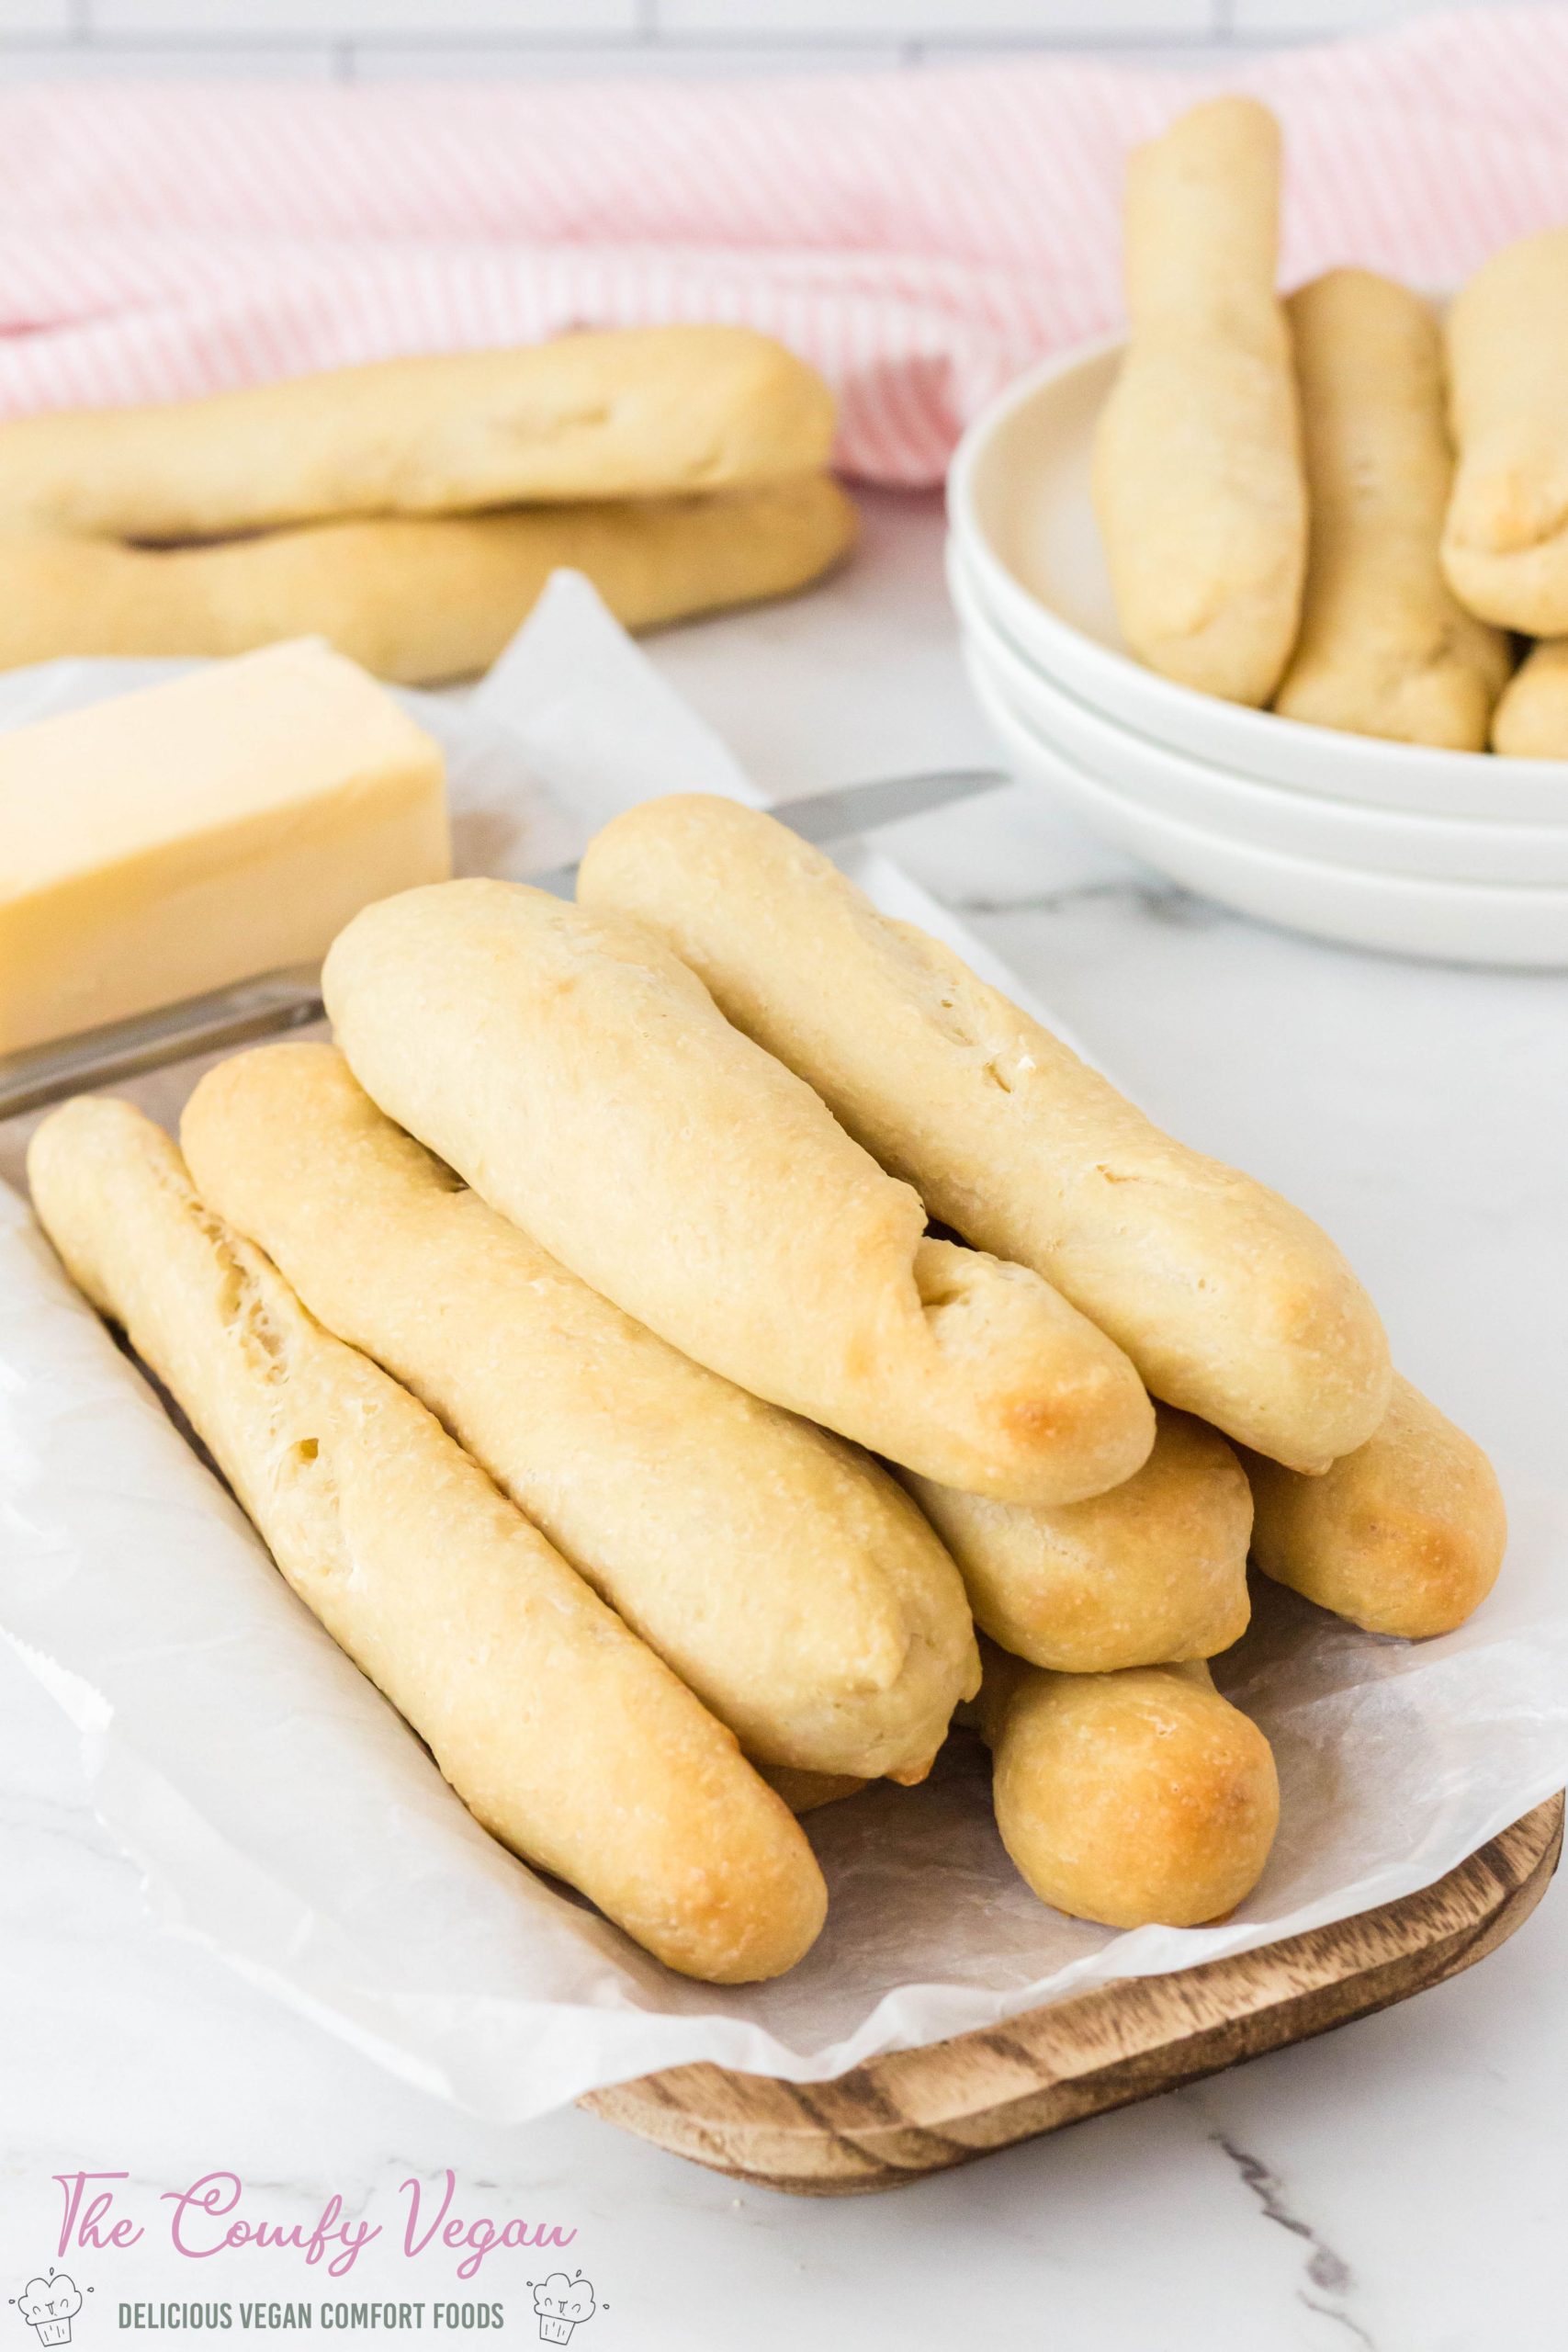 These easy to make homemade Vegan Bread Sticks go perfectly with soups, salads, pastas, and stews. They're soft, buttery, and oh so comforting. All you need are six common vegan pantry staples to make these Homemade Vegan Breadsticks.